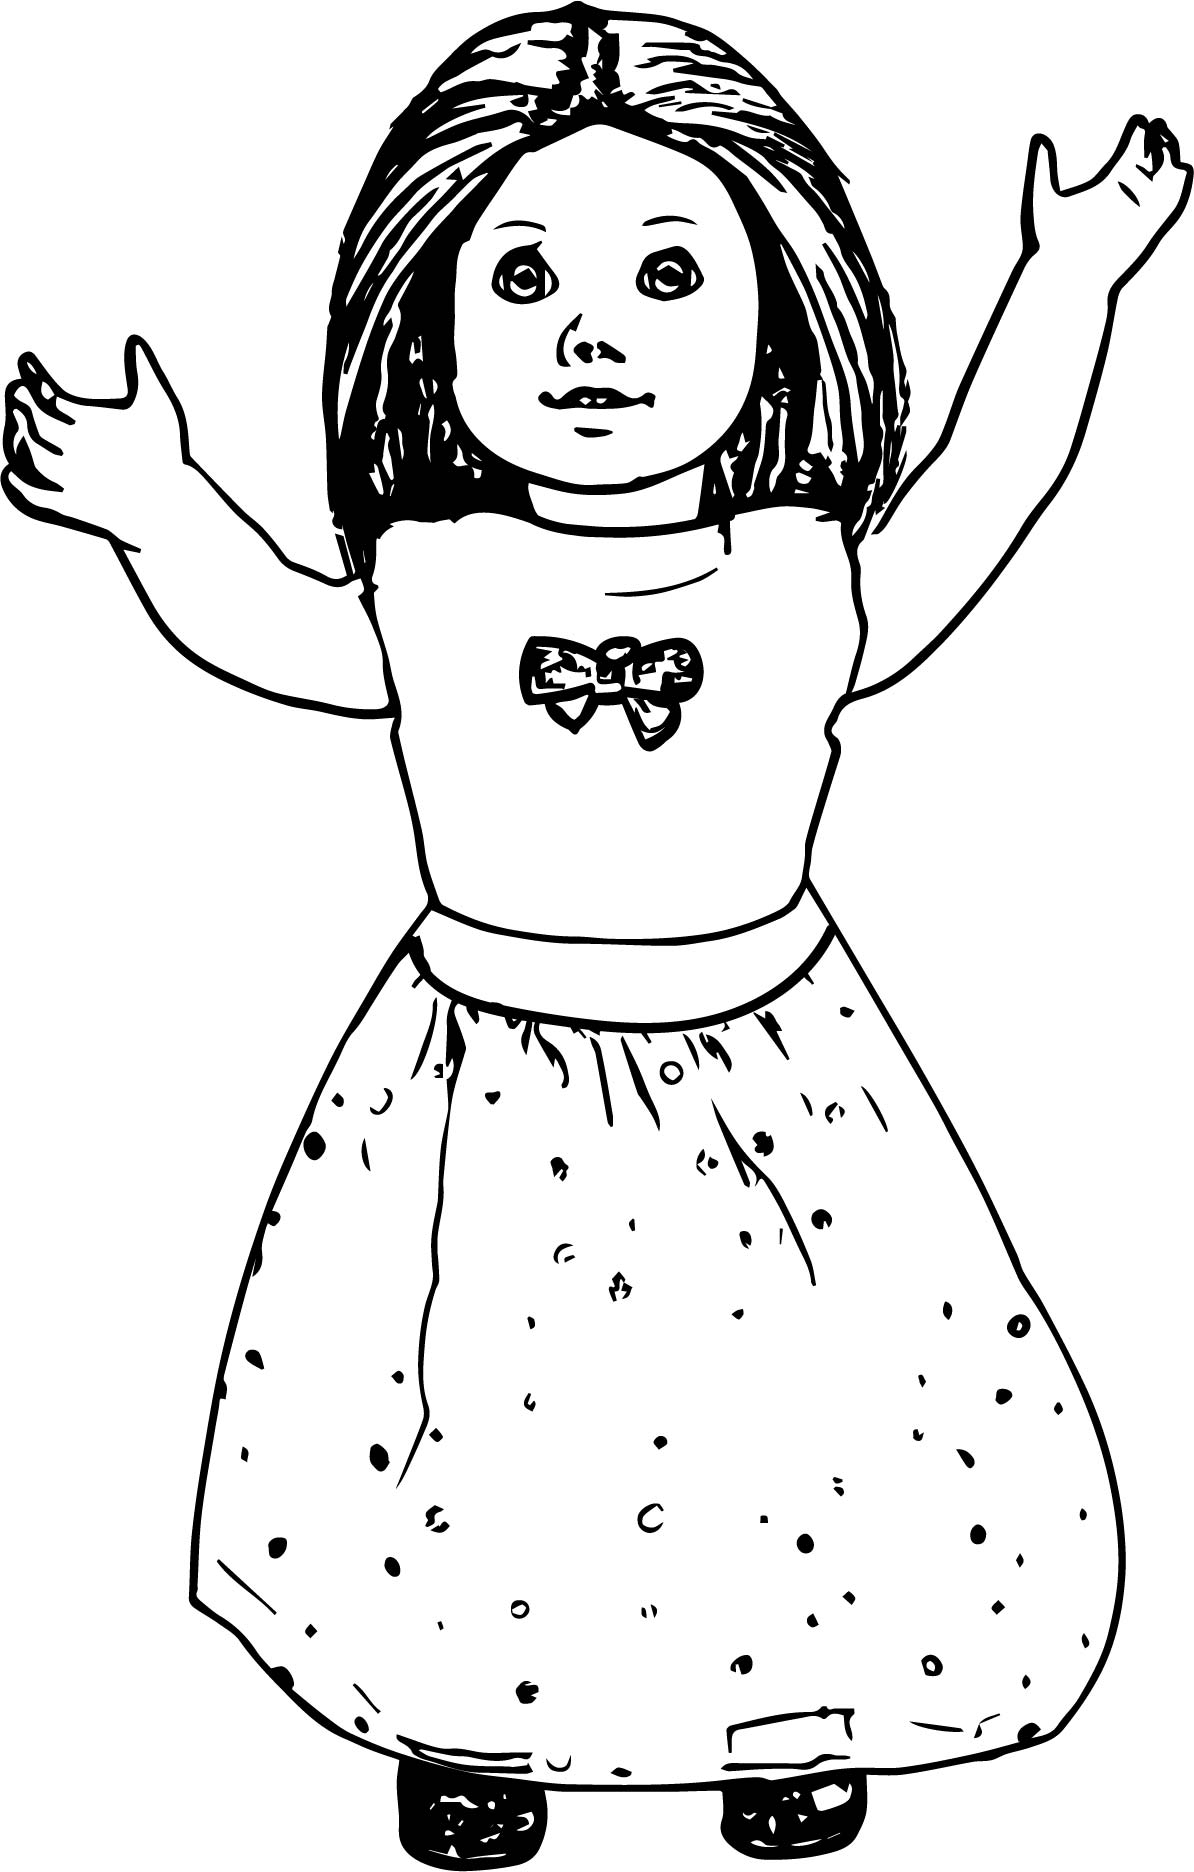 Download American Girl Coloring Pages - Best Coloring Pages For Kids